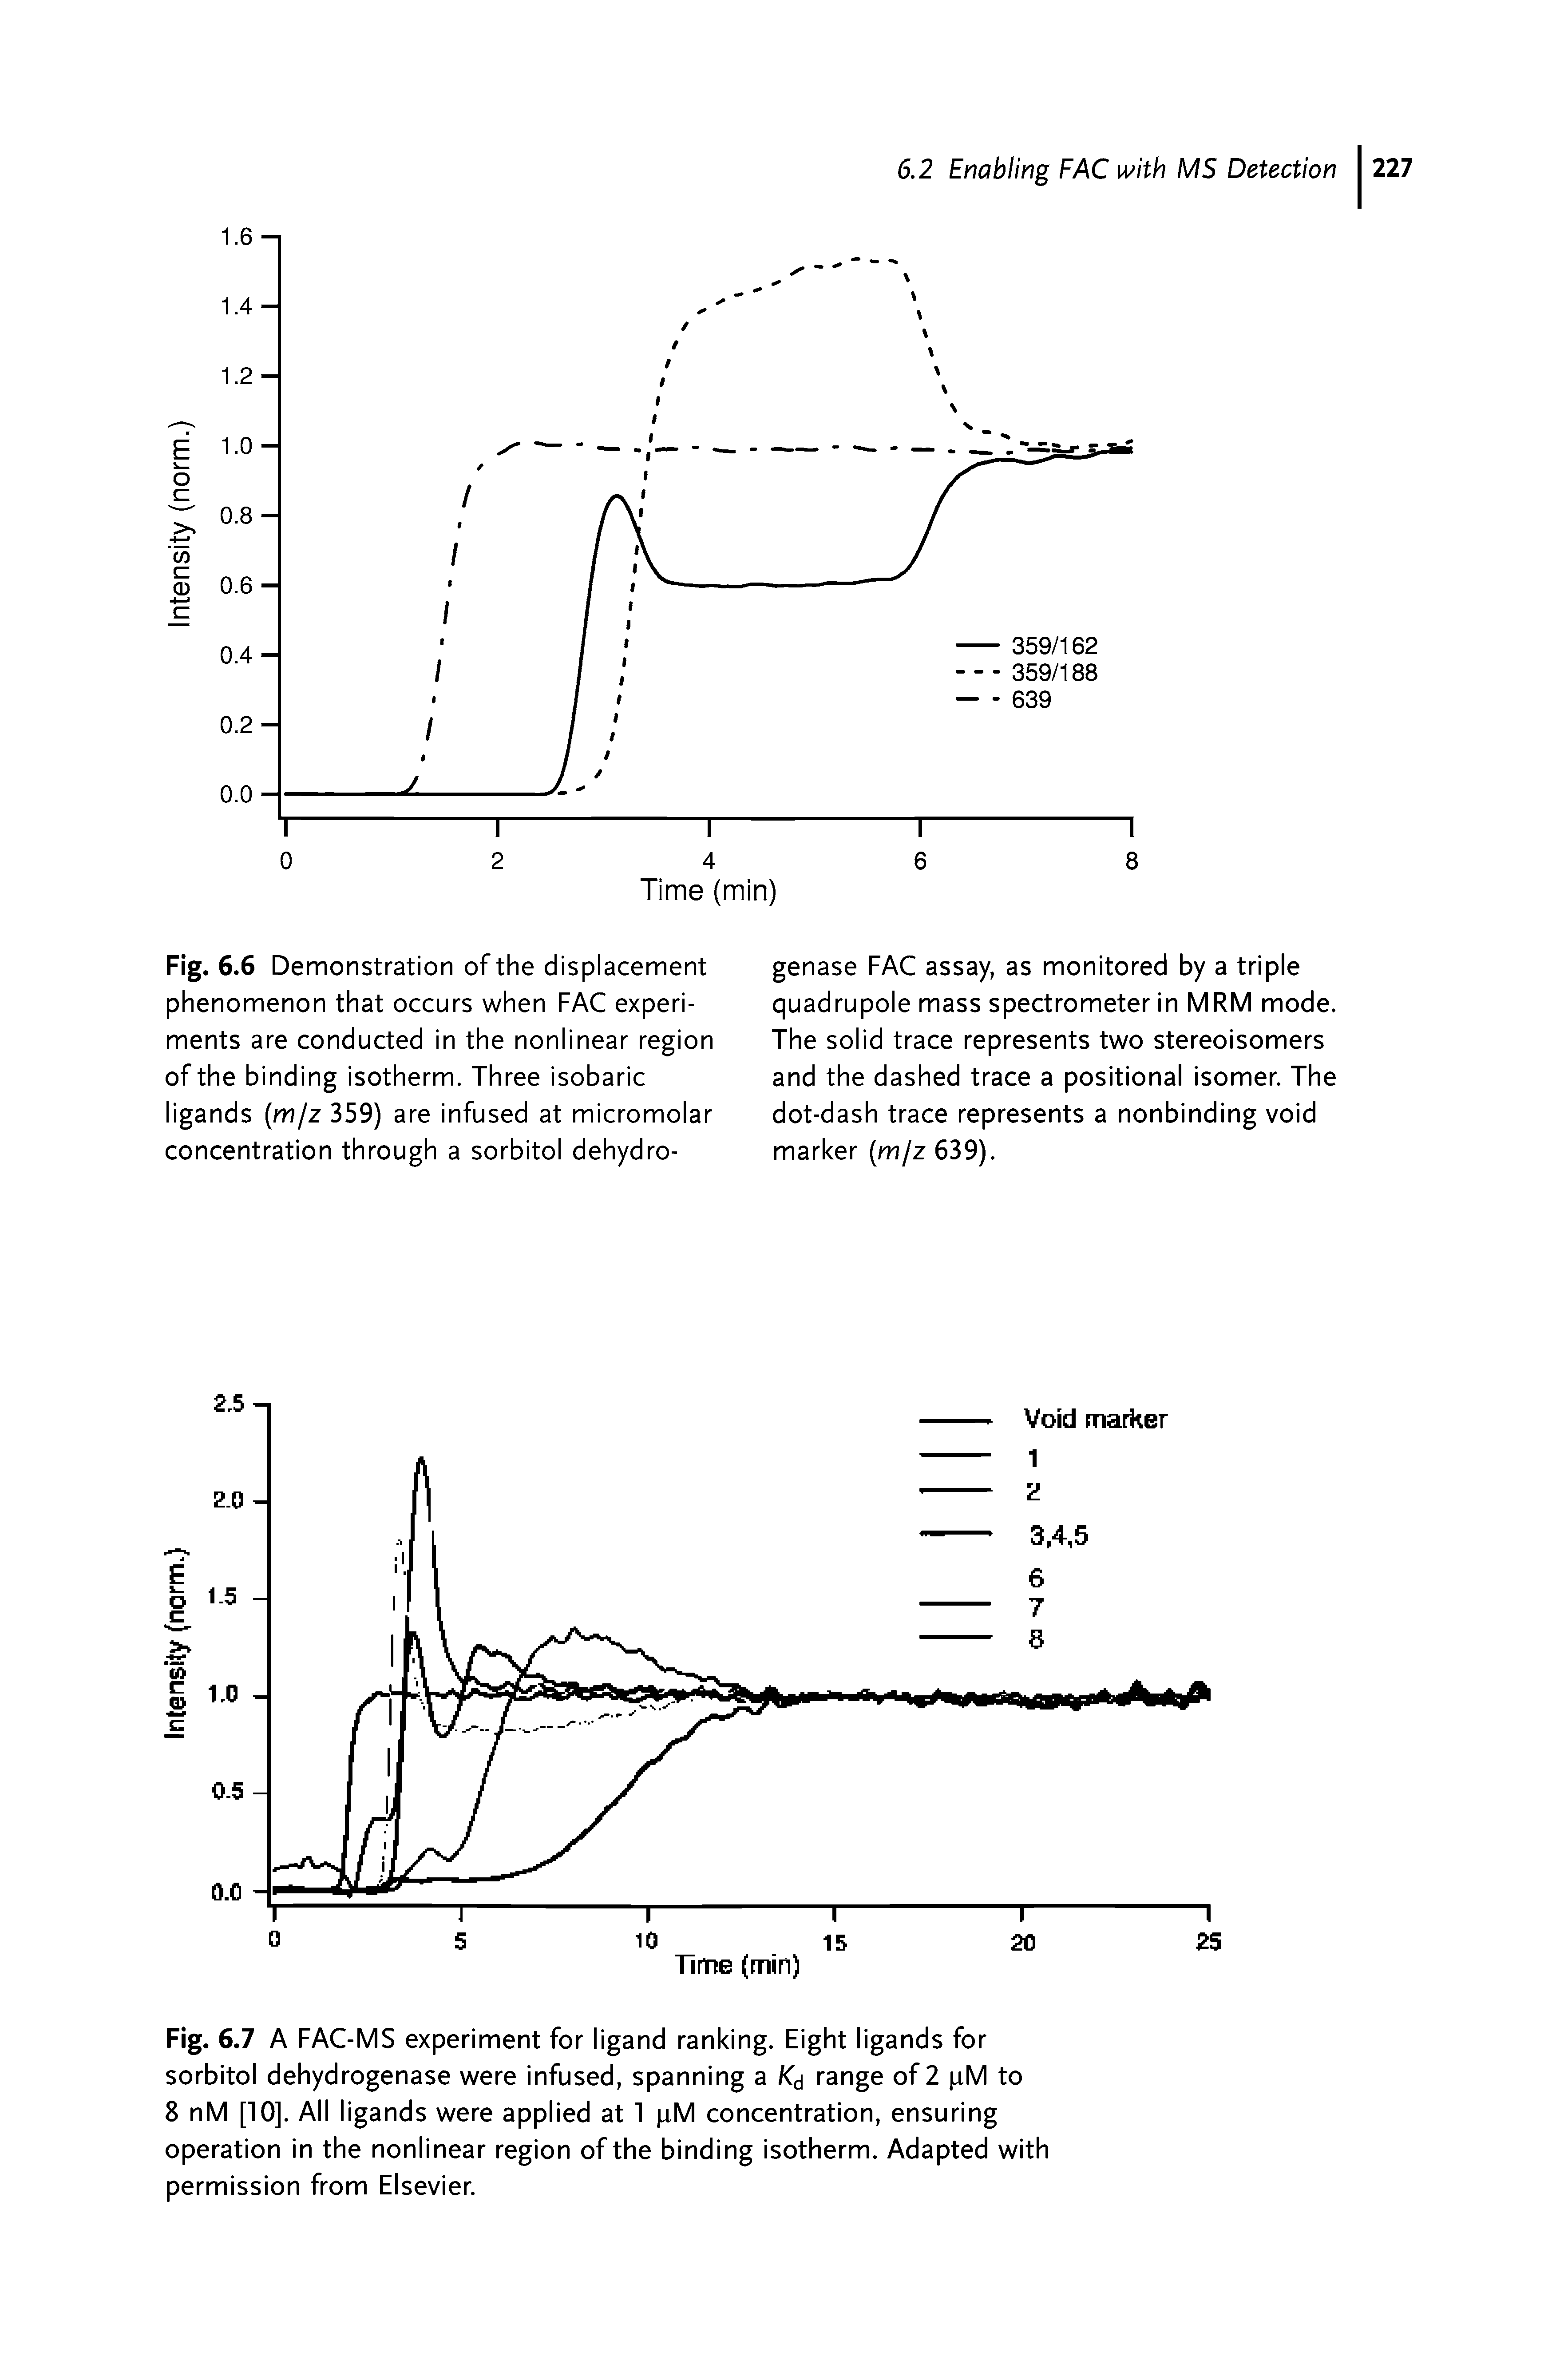 Fig. 6.7 A FAC-MS experiment for ligand ranking. Eight ligands for sorbitol dehydrogenase were infused, spanning a range of 2 pM to 8 nM [10]. All ligands were applied at 1 pM concentration, ensuring operation in the nonlinear region of the binding isotherm. Adapted with permission from Elsevier.